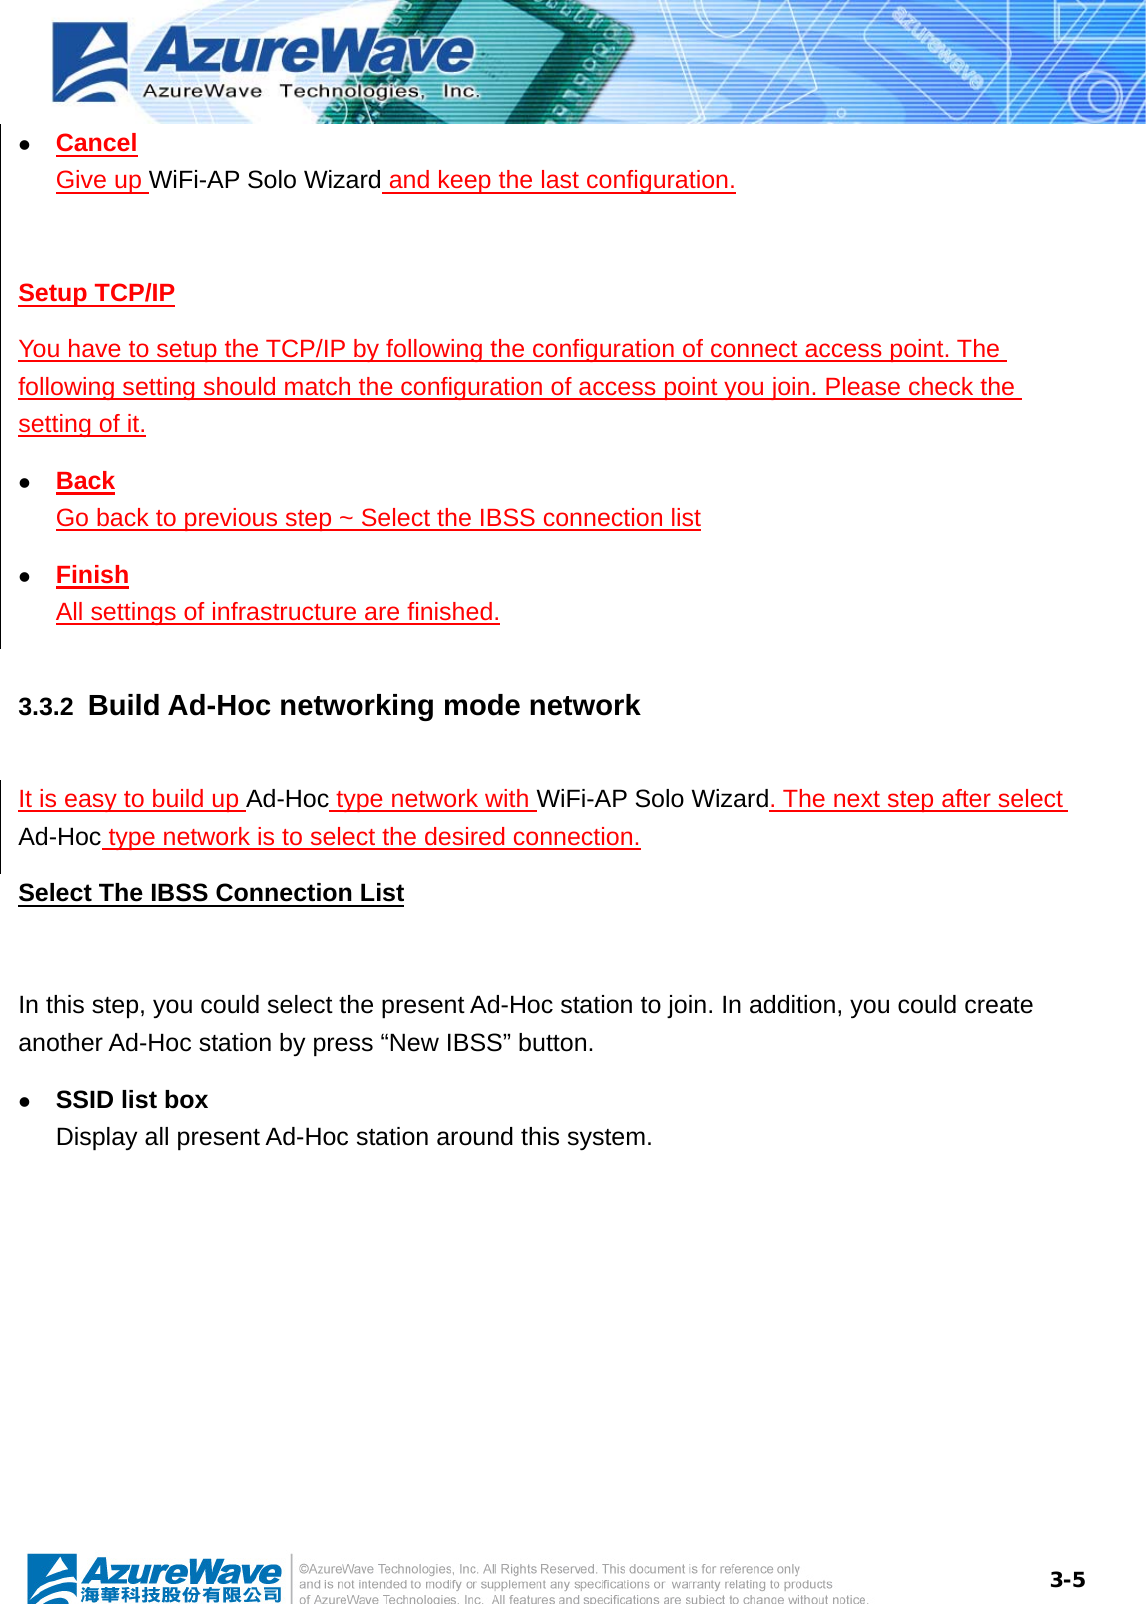  3-5z Cancel Give up WiFi-AP Solo Wizard and keep the last configuration.  Setup TCP/IP You have to setup the TCP/IP by following the configuration of connect access point. The following setting should match the configuration of access point you join. Please check the setting of it. z Back Go back to previous step ~ Select the IBSS connection list z Finish All settings of infrastructure are finished. 3.3.2  Build Ad-Hoc networking mode network It is easy to build up Ad-Hoc type network with WiFi-AP Solo Wizard. The next step after select Ad-Hoc type network is to select the desired connection. Select The IBSS Connection List  In this step, you could select the present Ad-Hoc station to join. In addition, you could create another Ad-Hoc station by press “New IBSS” button. z SSID list box Display all present Ad-Hoc station around this system. 